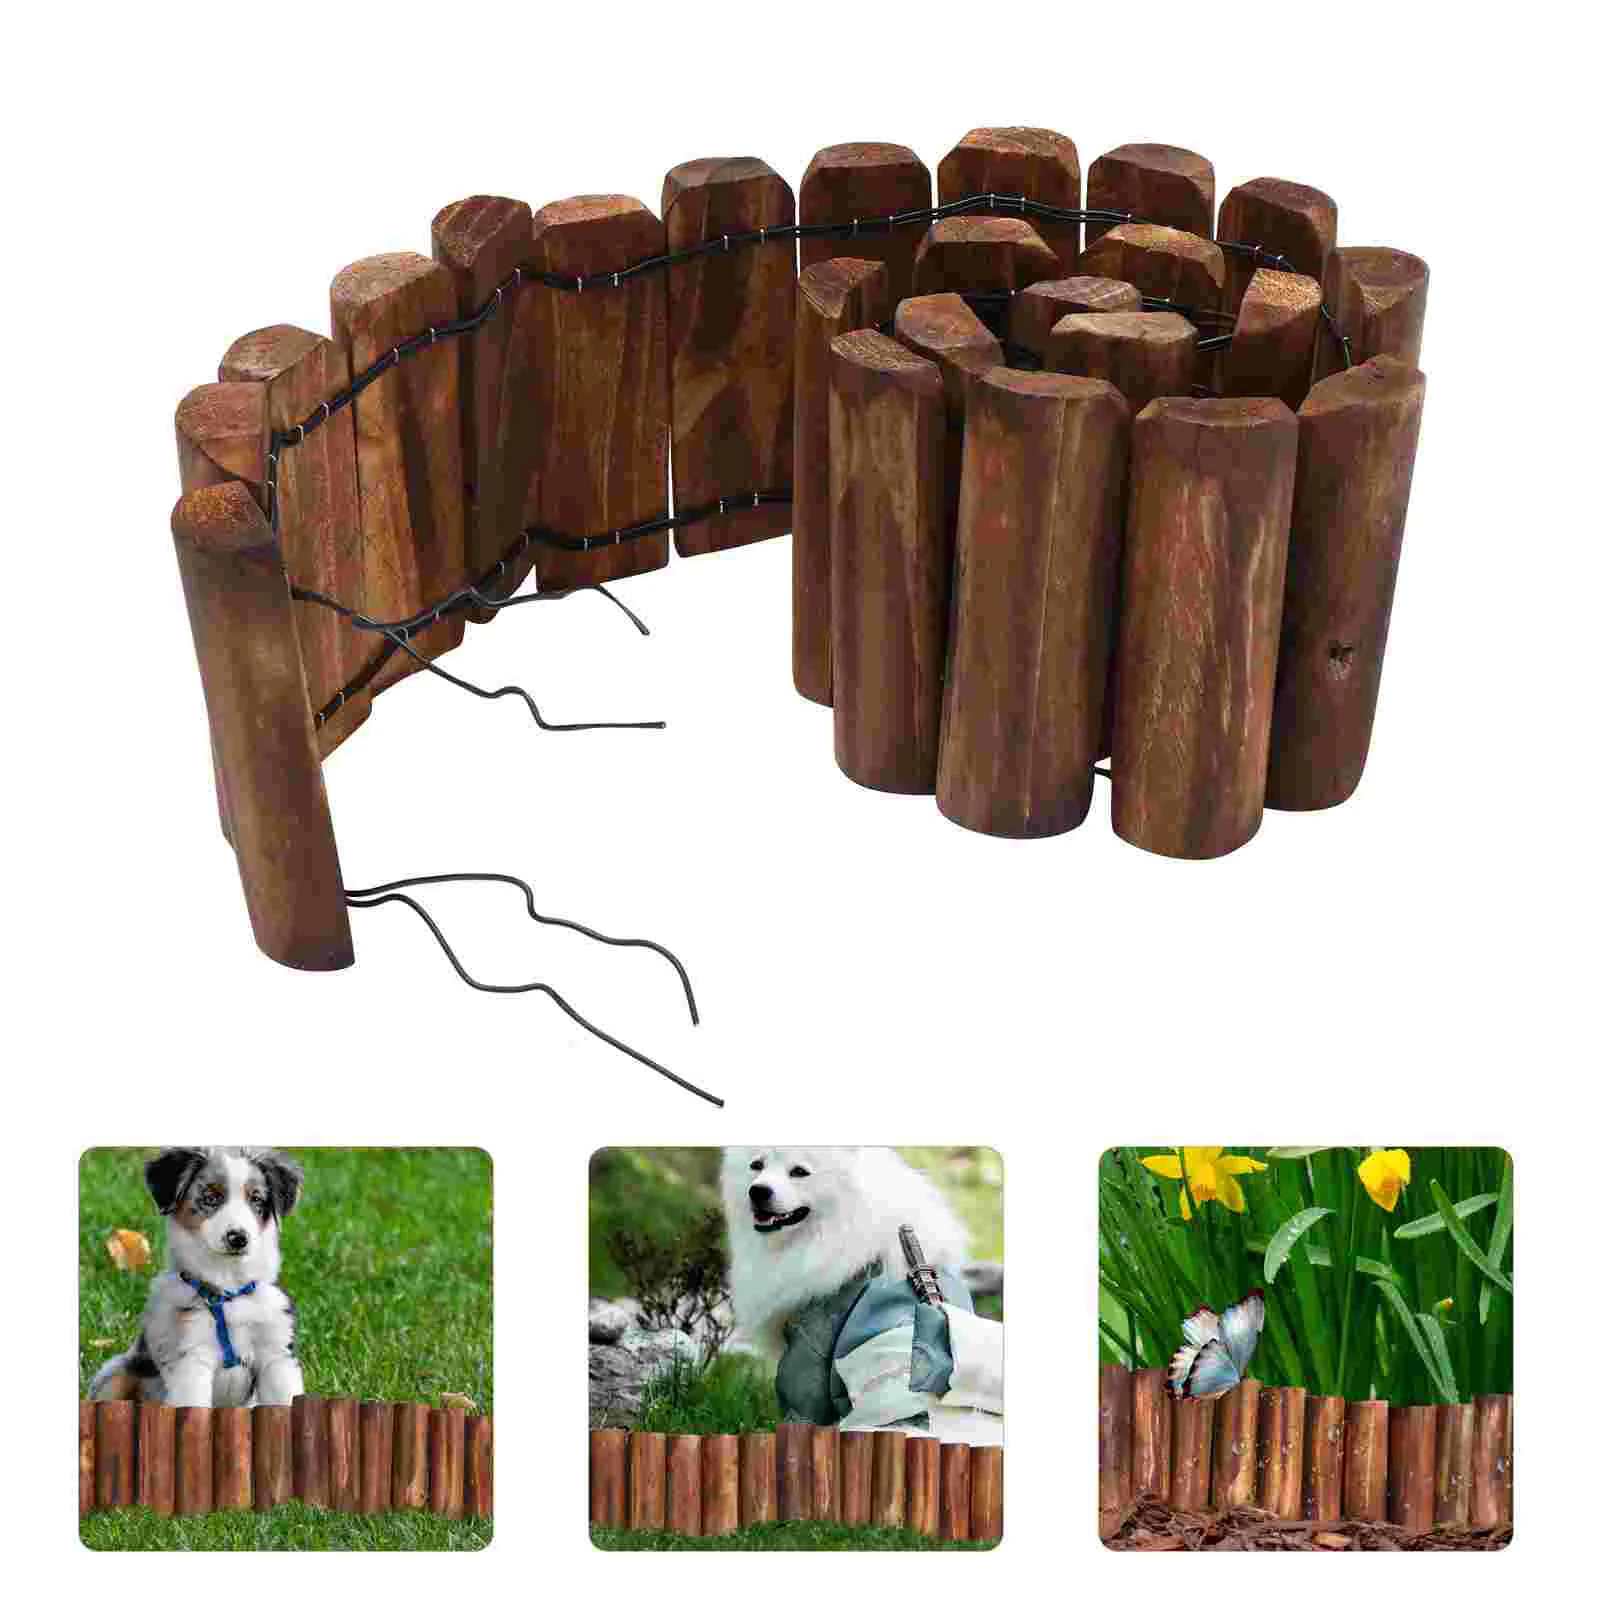 

Outdoor Carbonized Fence Decorative Wooden Pile Fence Garden Yard Edging Border Flower Wooden Edging Fence Home Decoration